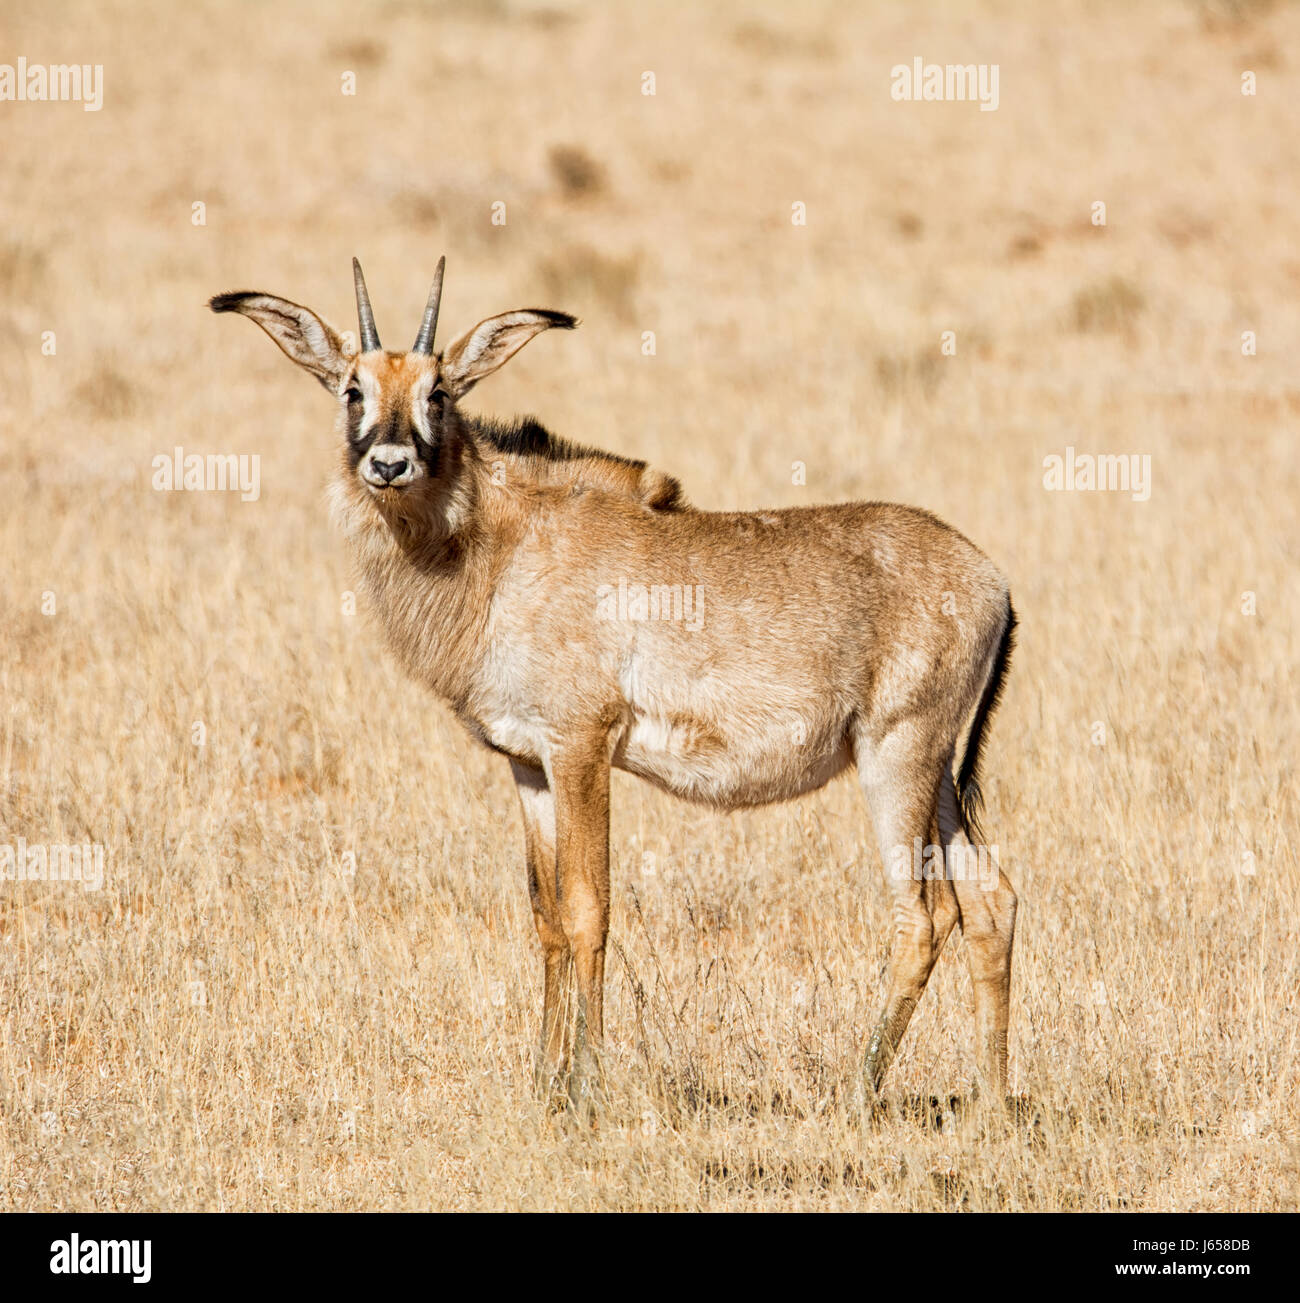 Roan Antelope In Southern African Savanna Stock Photo Alamy